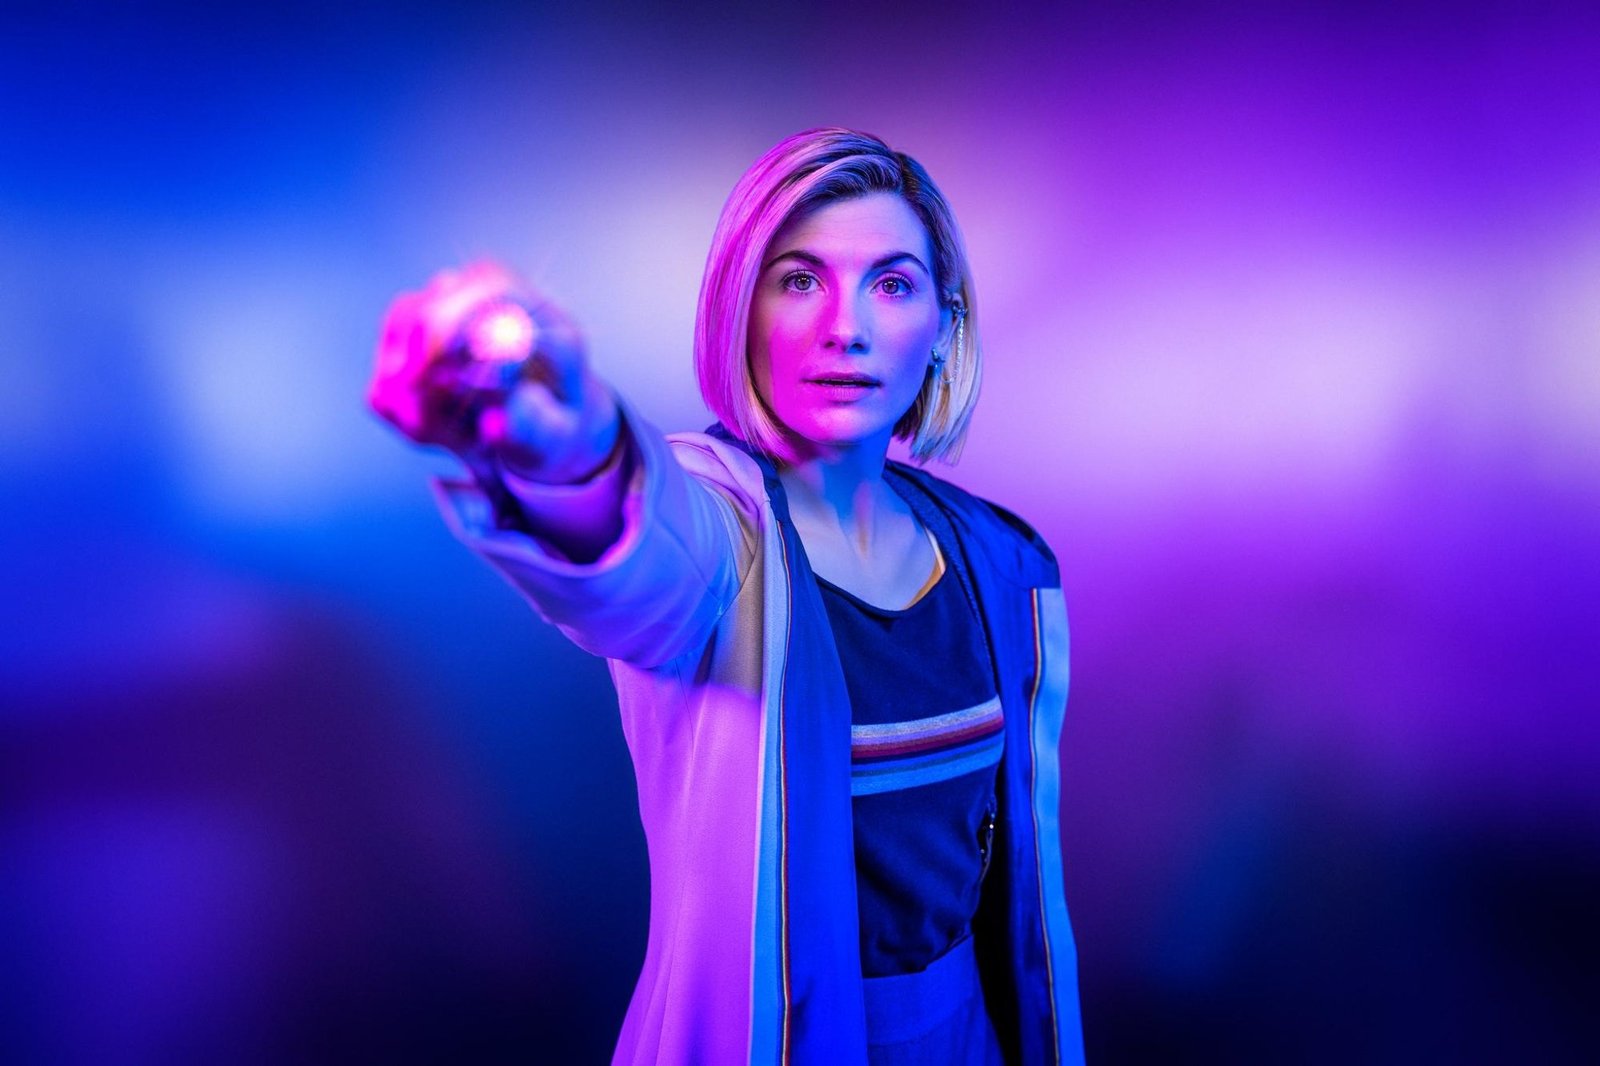 Jodie Whittaker Recalls “Four Years of Heaven” Working on Doctor Who